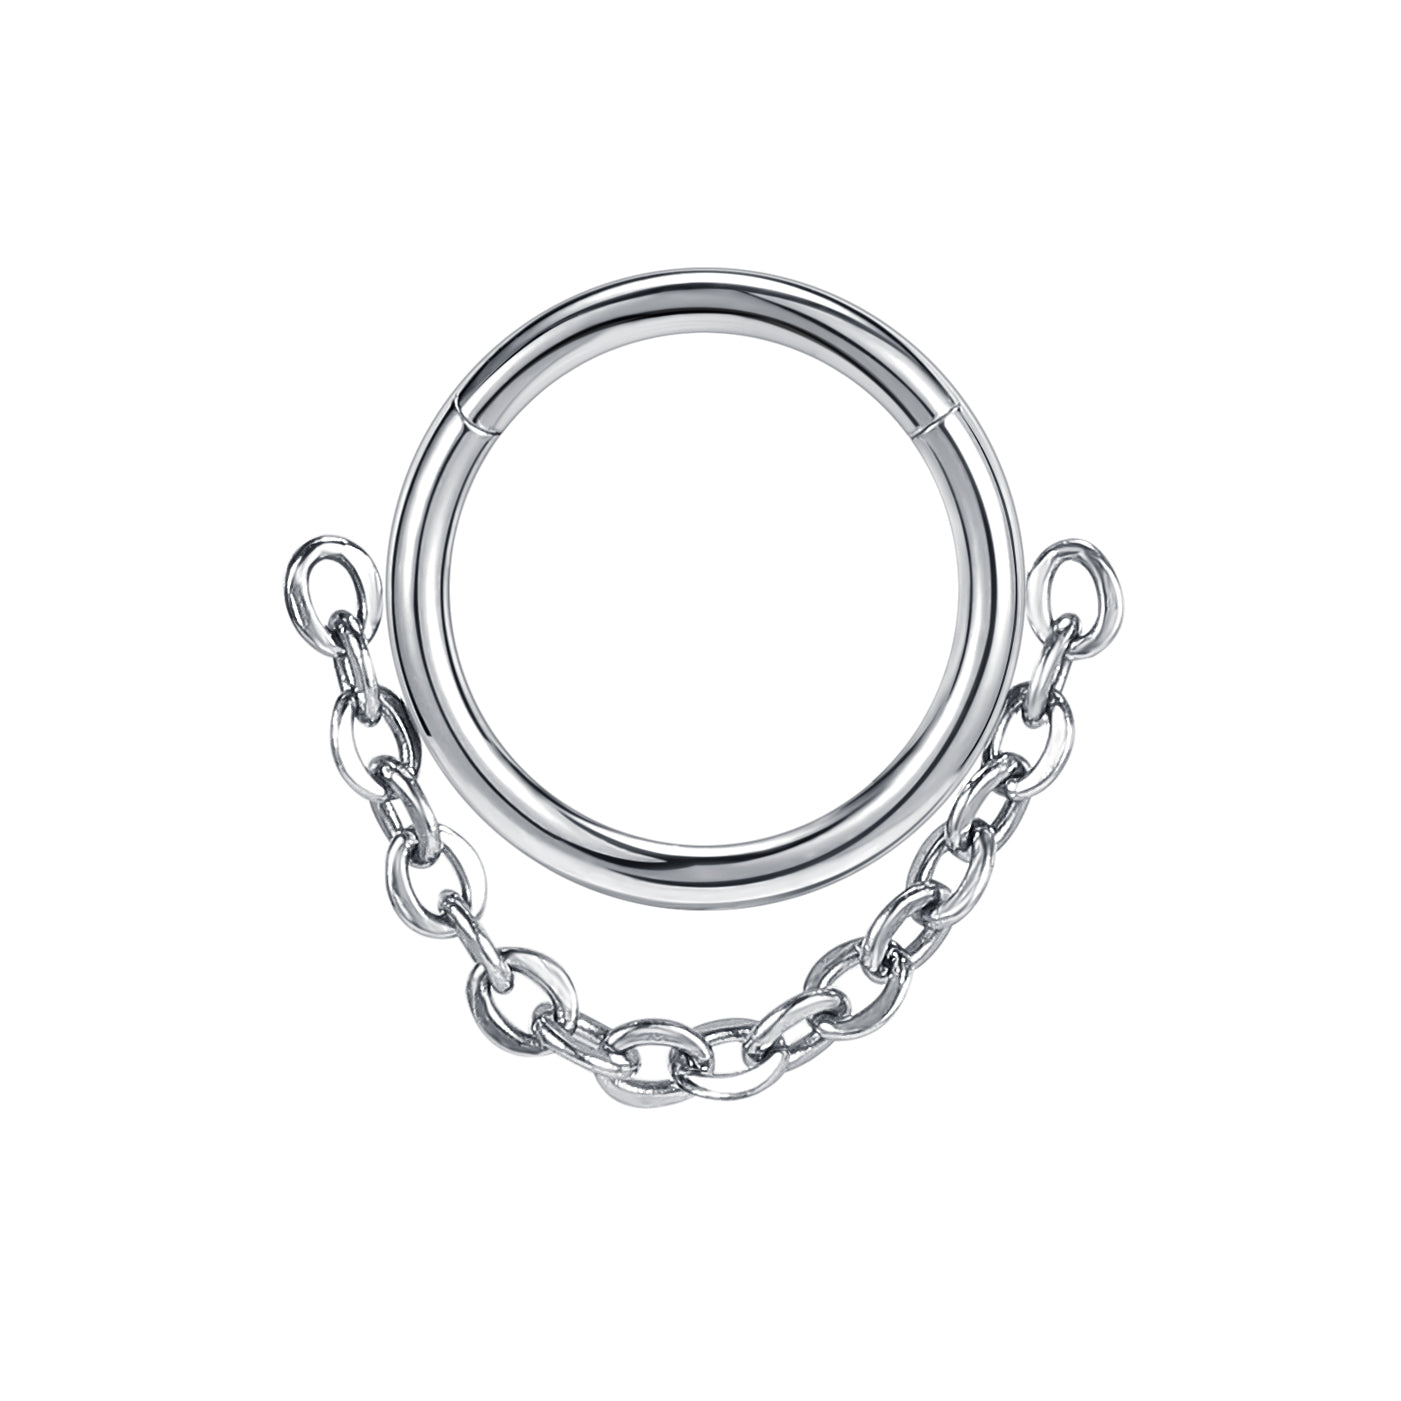 16g-septum-clicker-nose-ring-chain-pendant-cartilage-helix-piercing